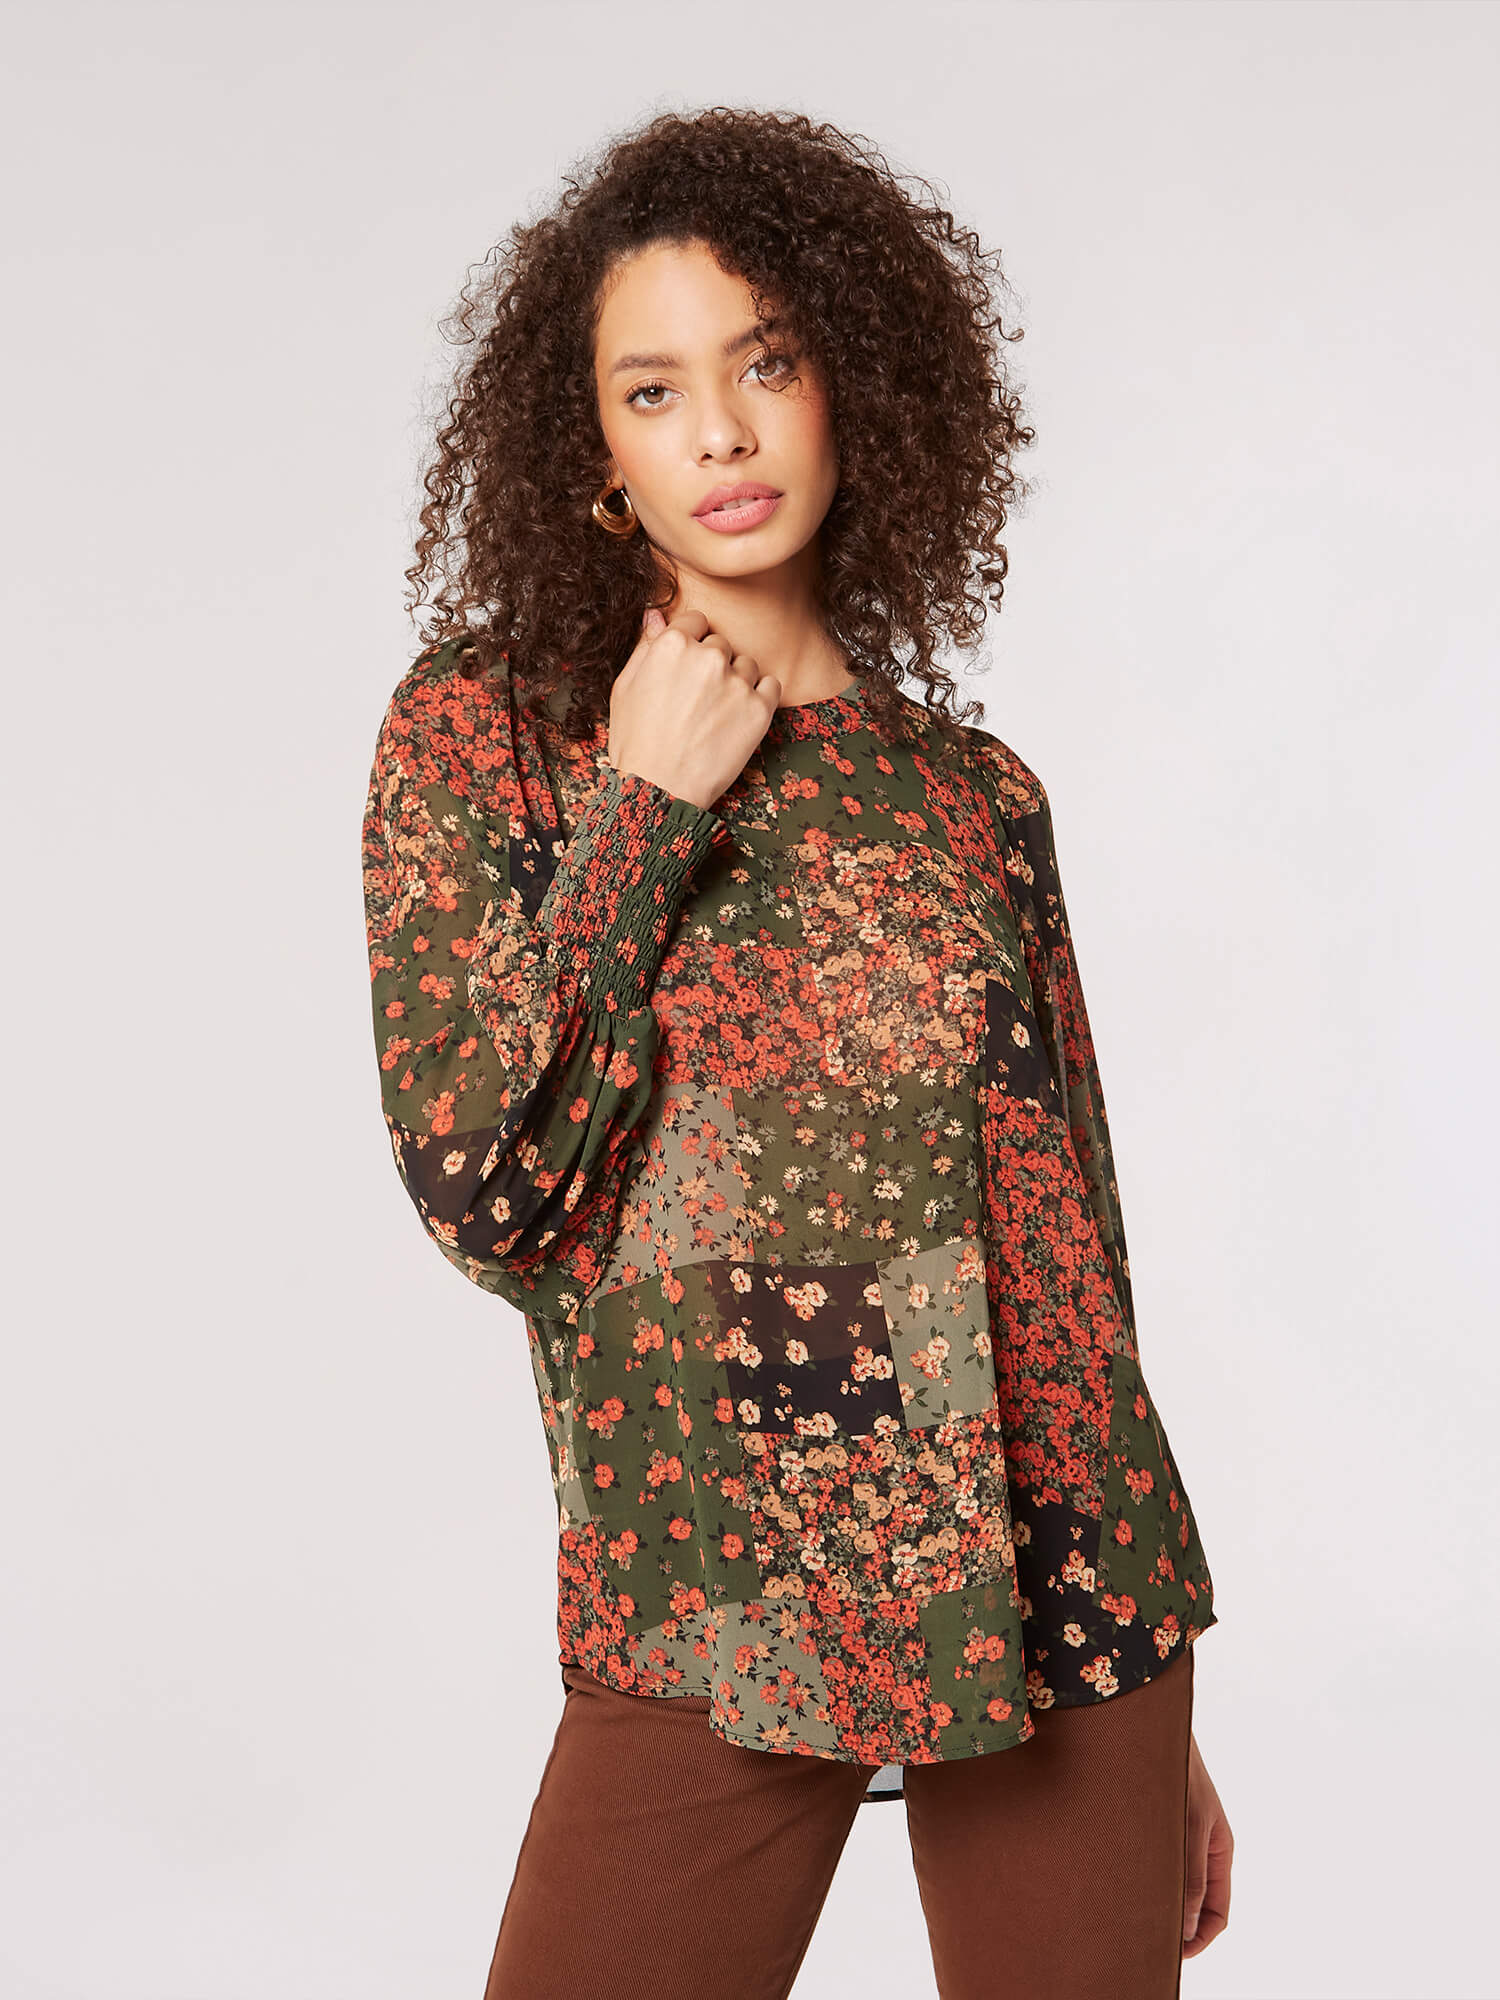 Patchwork Ditsy Floral Top | Apricot Clothing